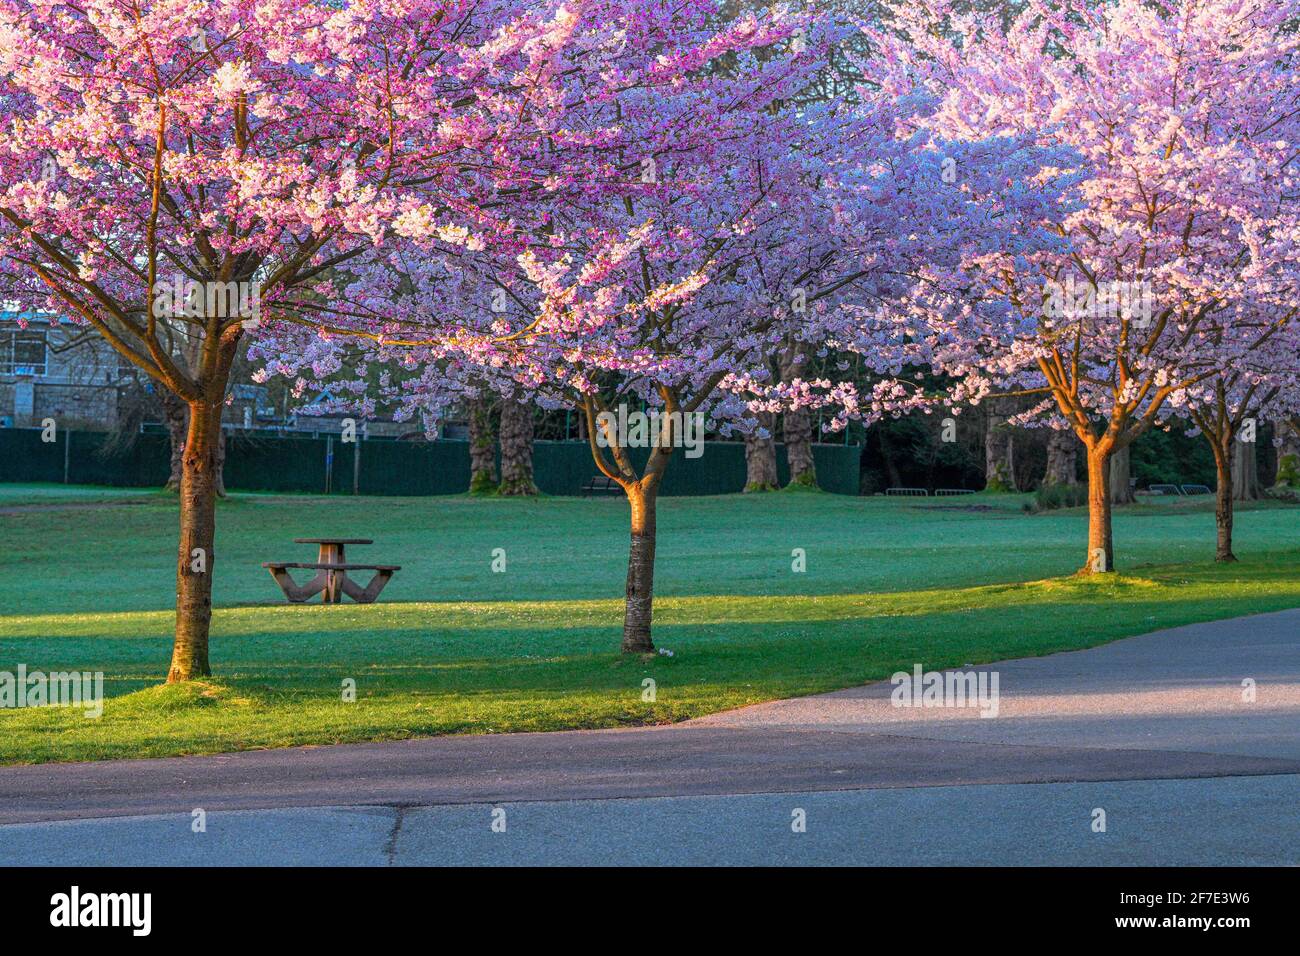 Cherry trees in bloom, Stanley Park, Vancouver, British Columbia, Canada Stock Photo